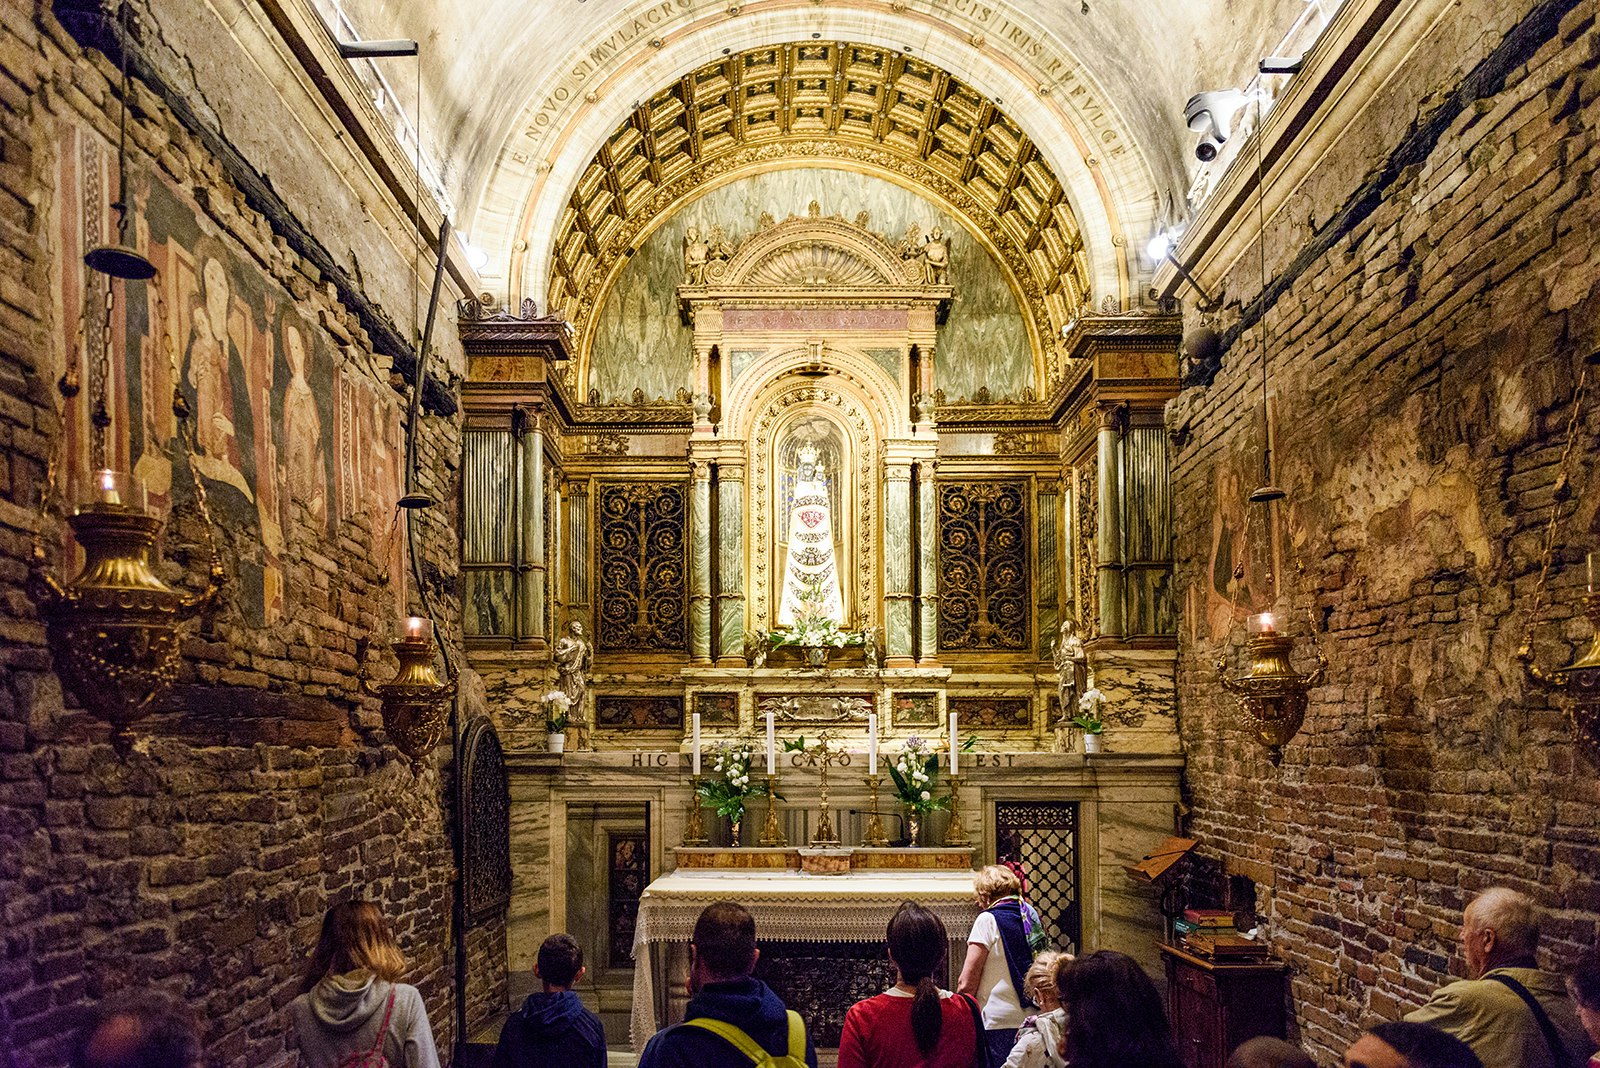 People stand in a narrow room with old brick walls, a vaulted ceiling, and a golden altar at the Basilica Santa Casa. Le Marche, Italy.